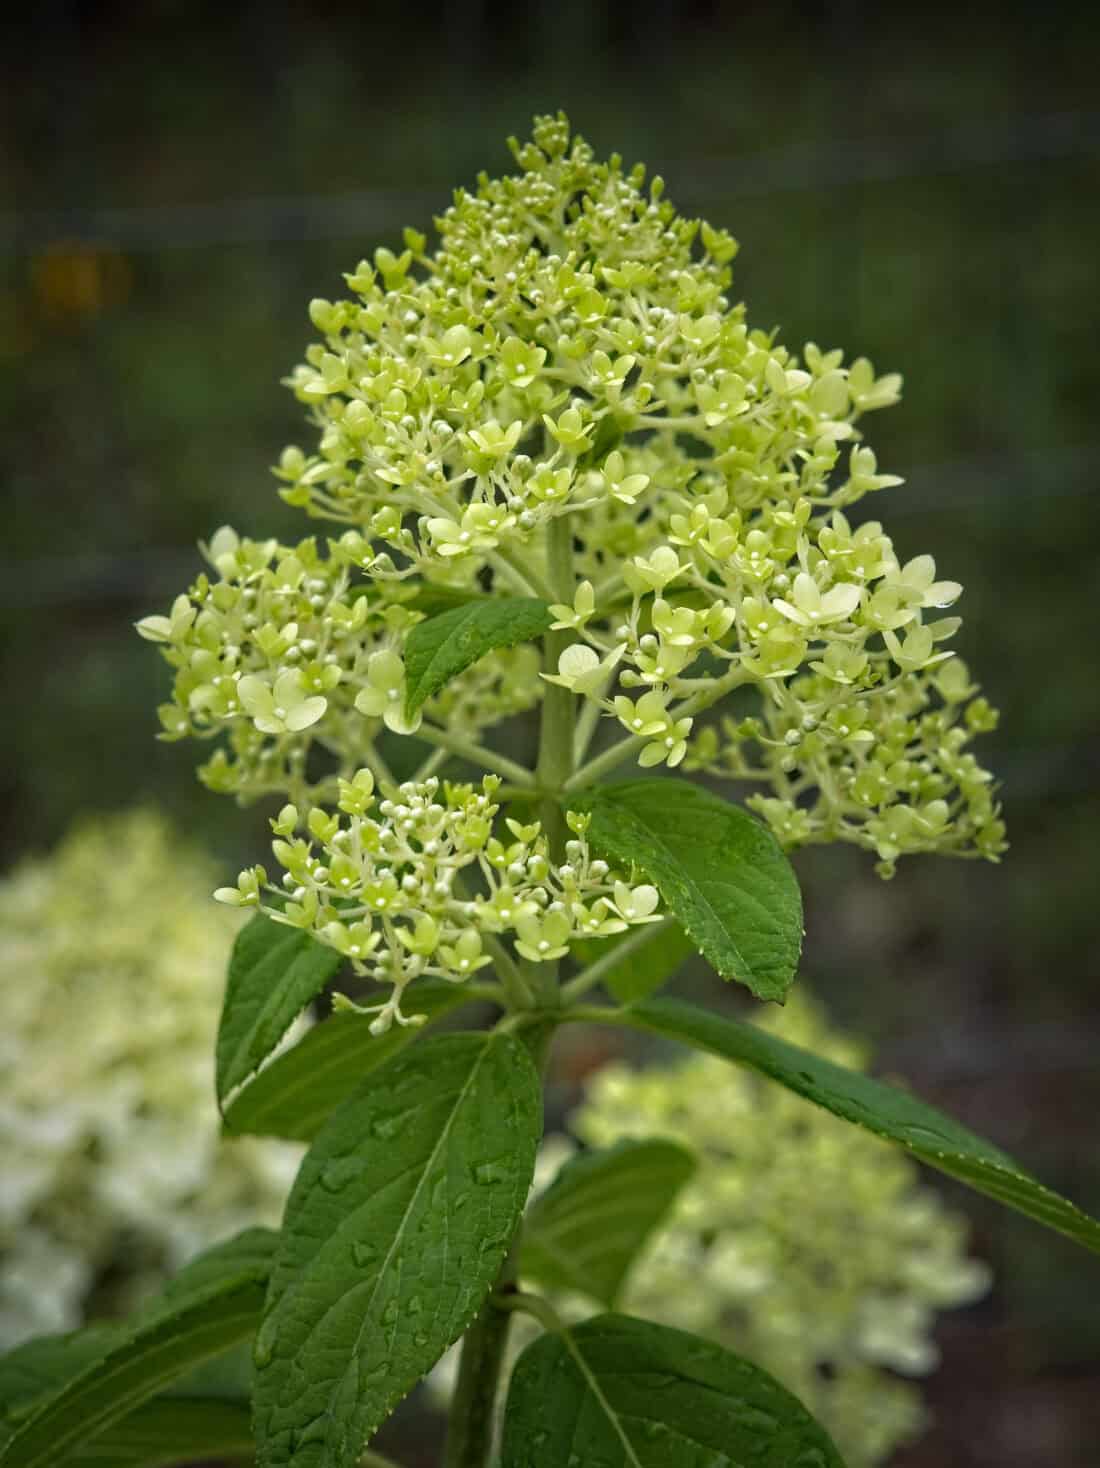 Close-up of a blooming hydrangea paniculata with greenish-white flowers arranged in a cone-shaped cluster. The flower's branches are lined with vibrant green leaves, and the background, slightly blurred, hints at a serene Chartreuse Garden.